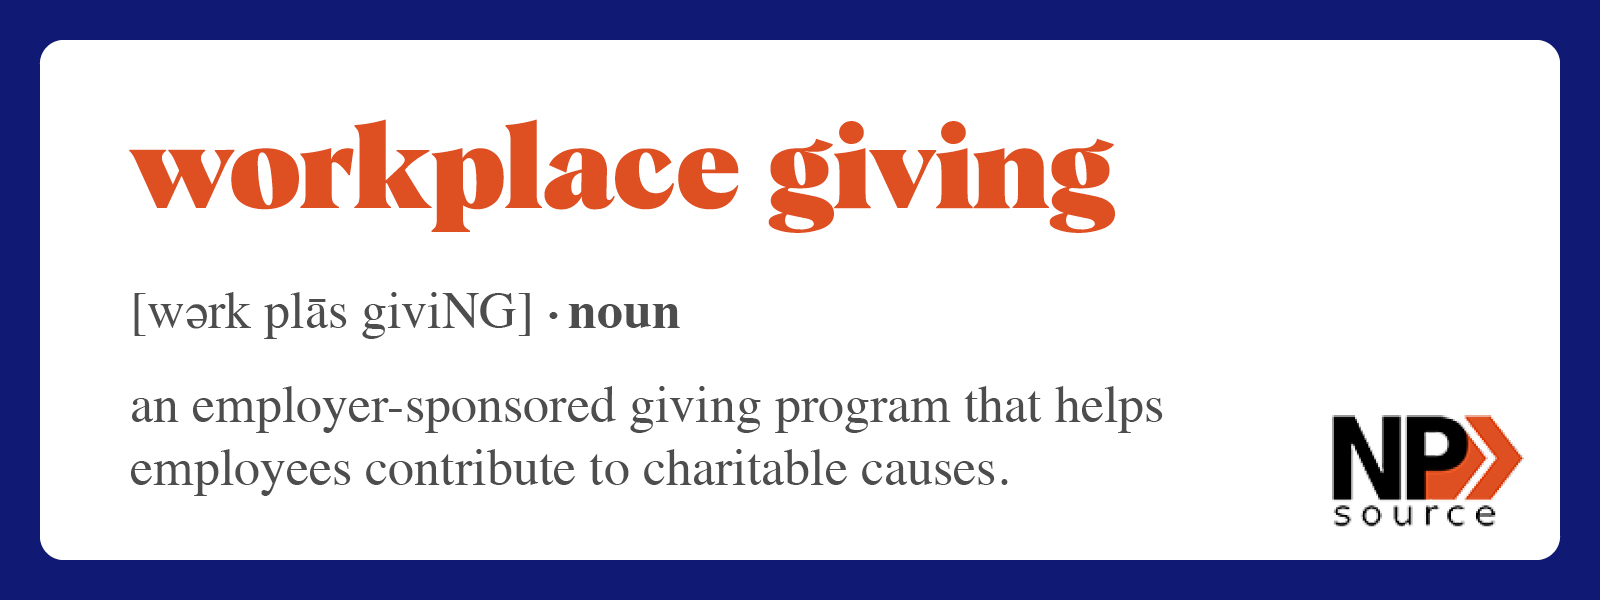 This graphic shows the definition of workplace giving, which is also outlined in the text below.